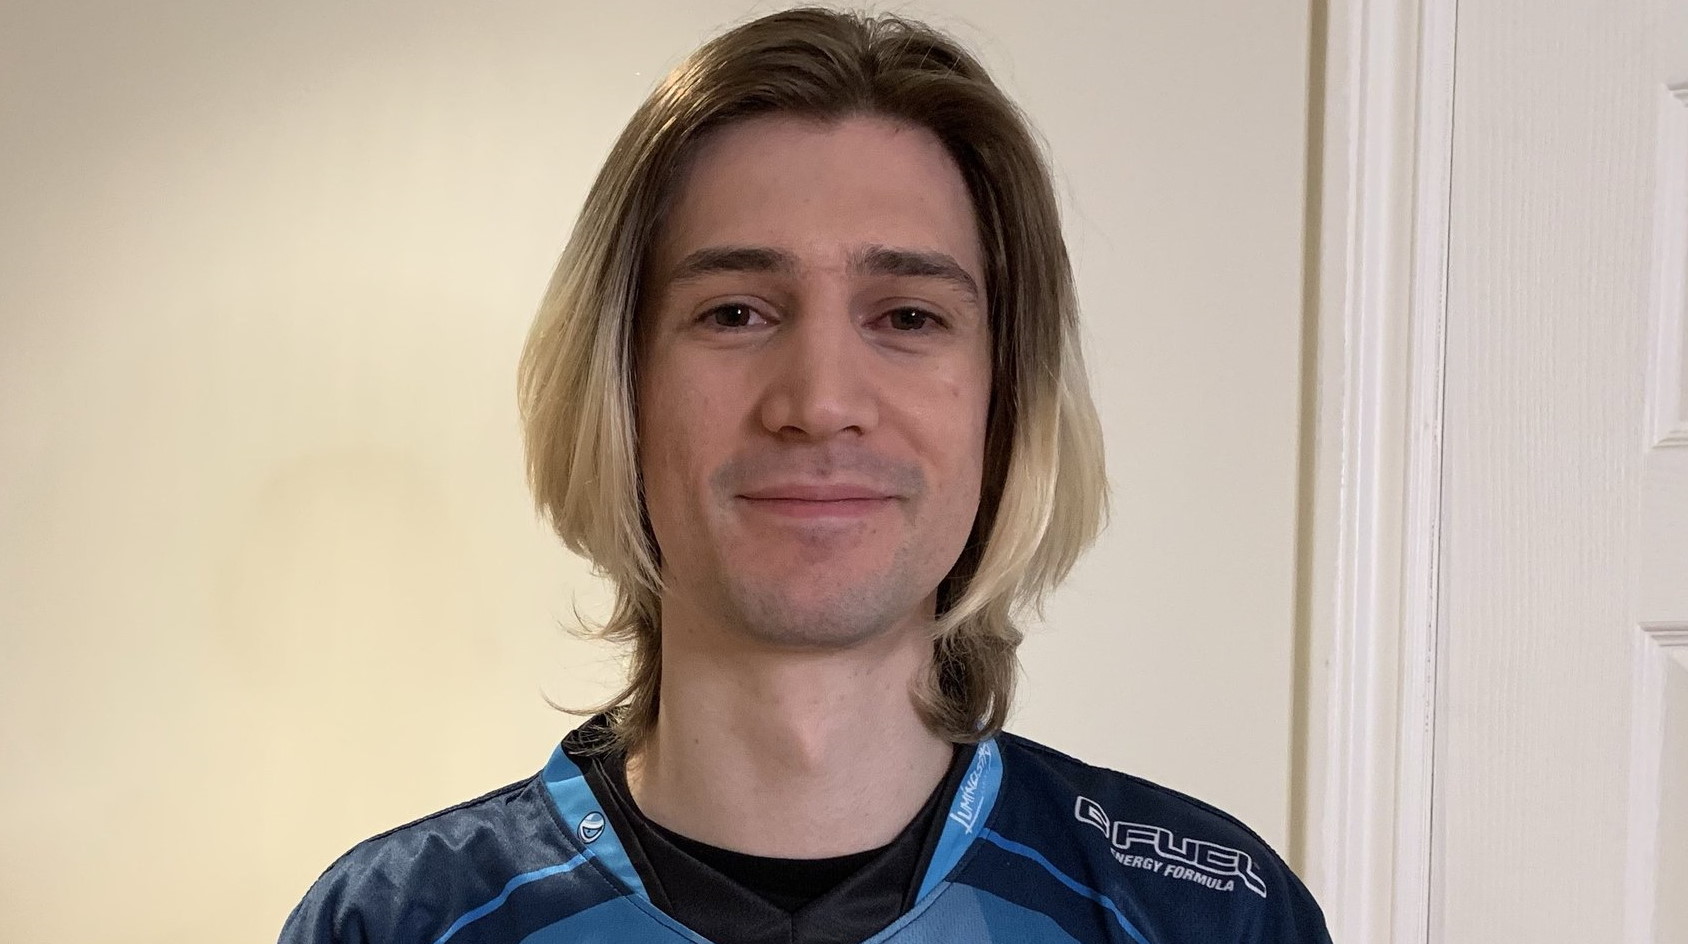  xQc promises to be more careful after he gets suspended from Twitch yet again 